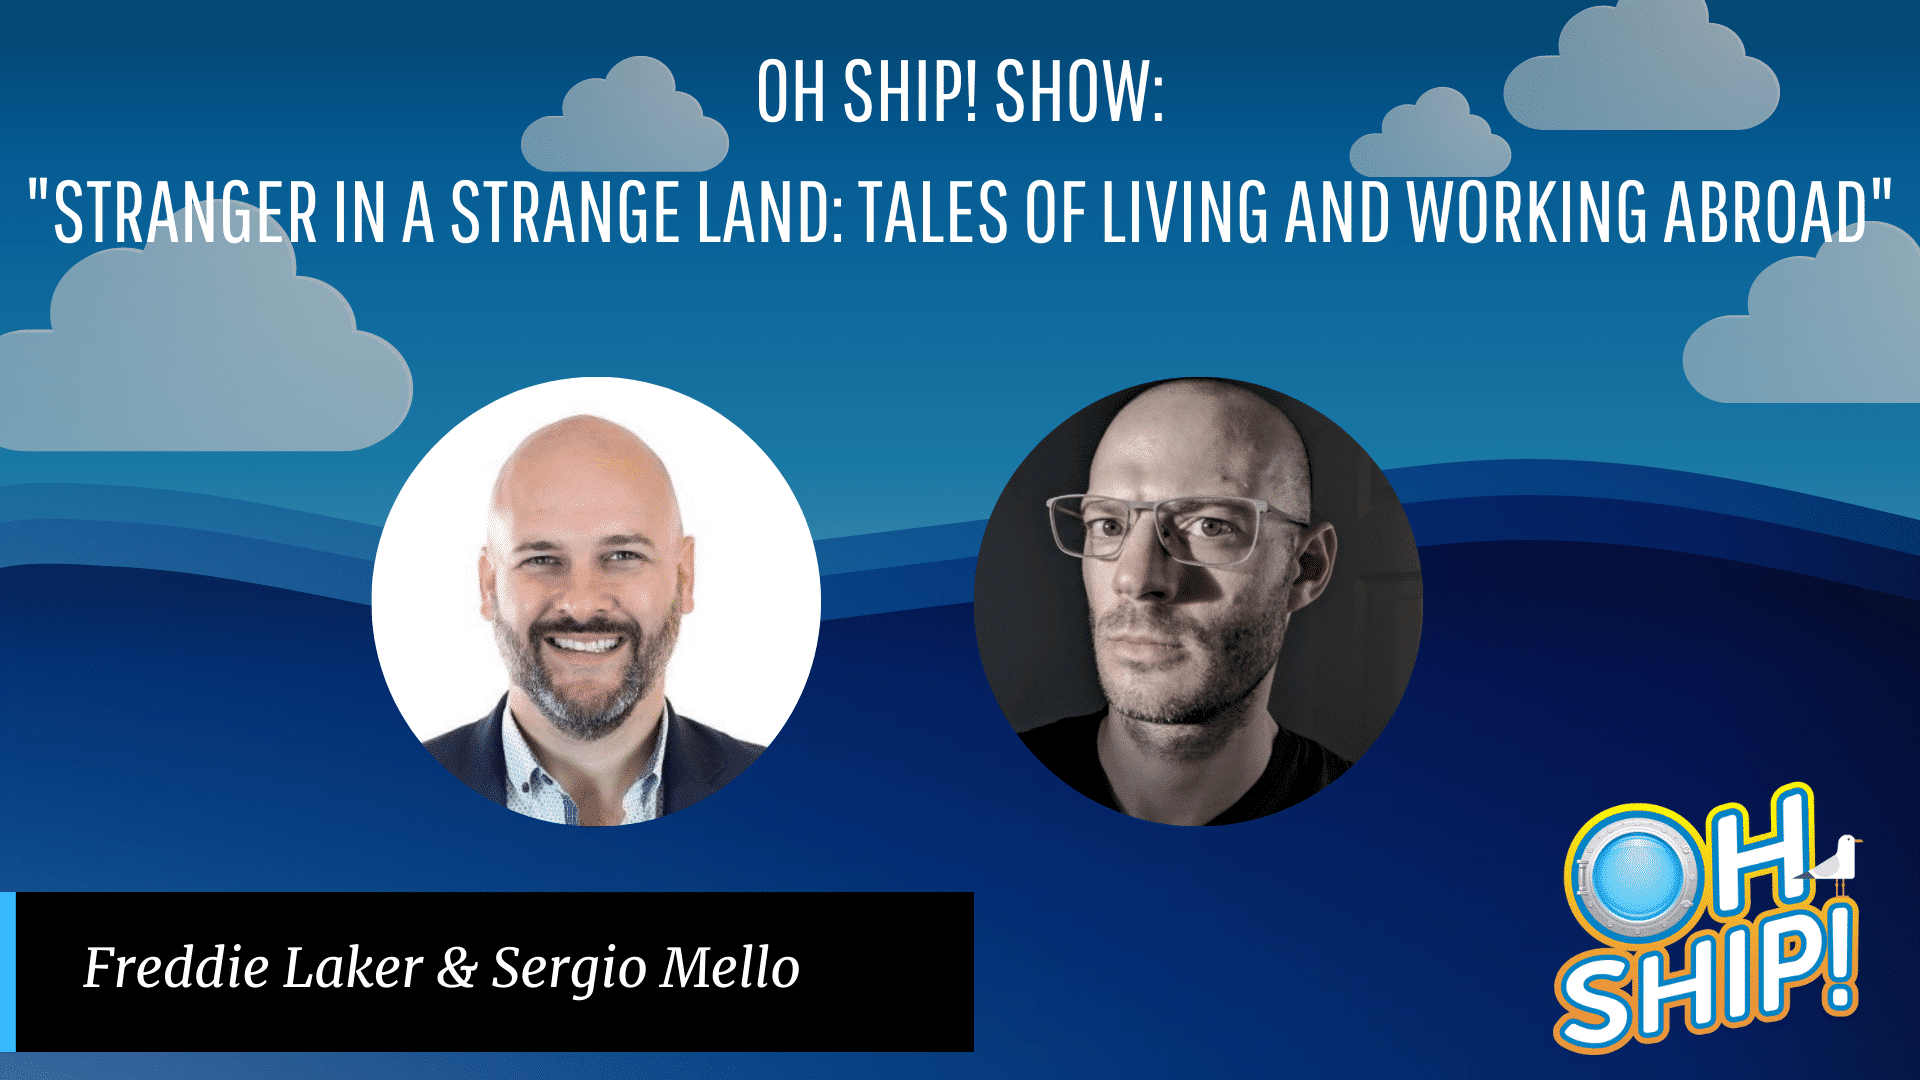 A promotional graphic for the "Oh Ship! Show" titled "Stranger in a Strange Land: Tales of Living and Working Abroad." It features photos of two men: one smiling in a blazer and the other wearing glasses with a neutral expression. Below their photos, Freddie Laker and Sergio Mello's names are listed. The background showcases a blue sky with clouds, and the "Oh Ship!